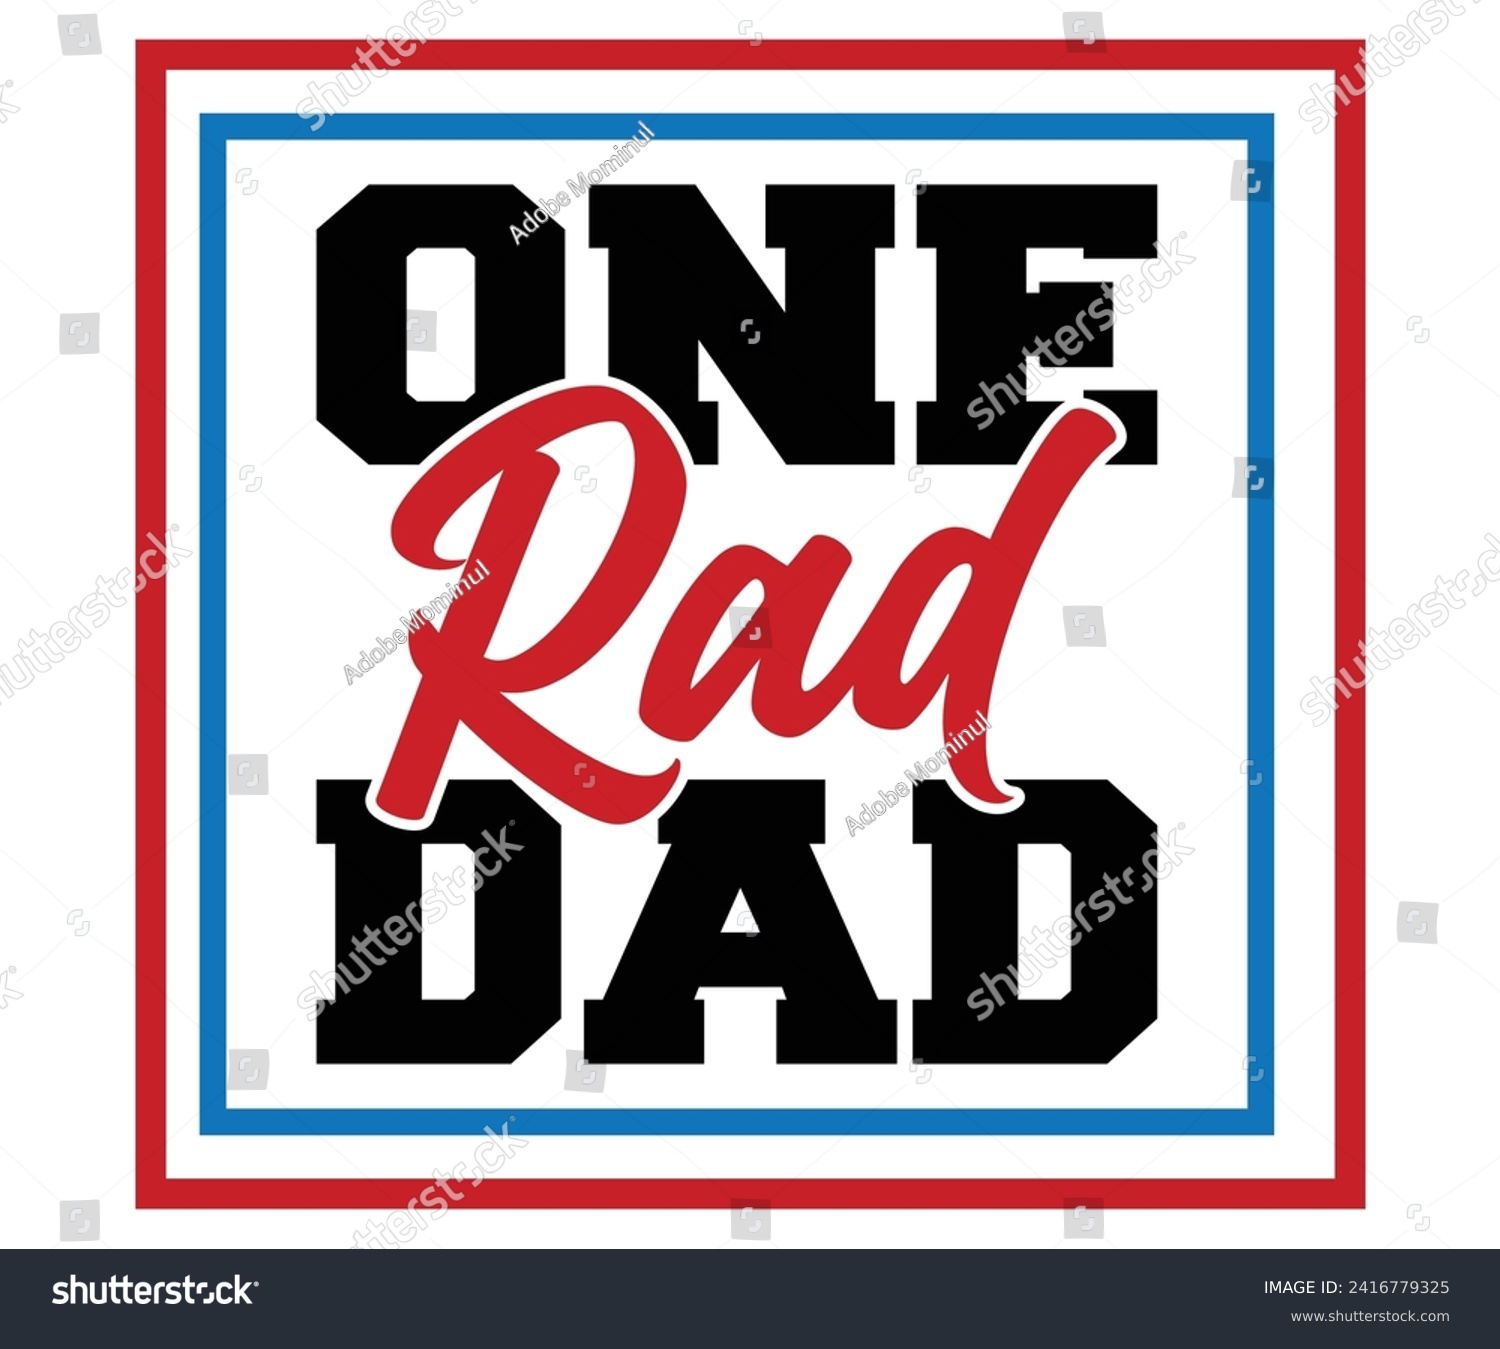 SVG of One Rad Dad Svg,Father's Day Svg,Papa svg,Grandpa Svg,Father's Day Saying Qoutes,Dad Svg,Funny Father, Gift For Dad Svg,Daddy Svg,Family Svg,T shirt Design,Svg Cut File,Typography svg